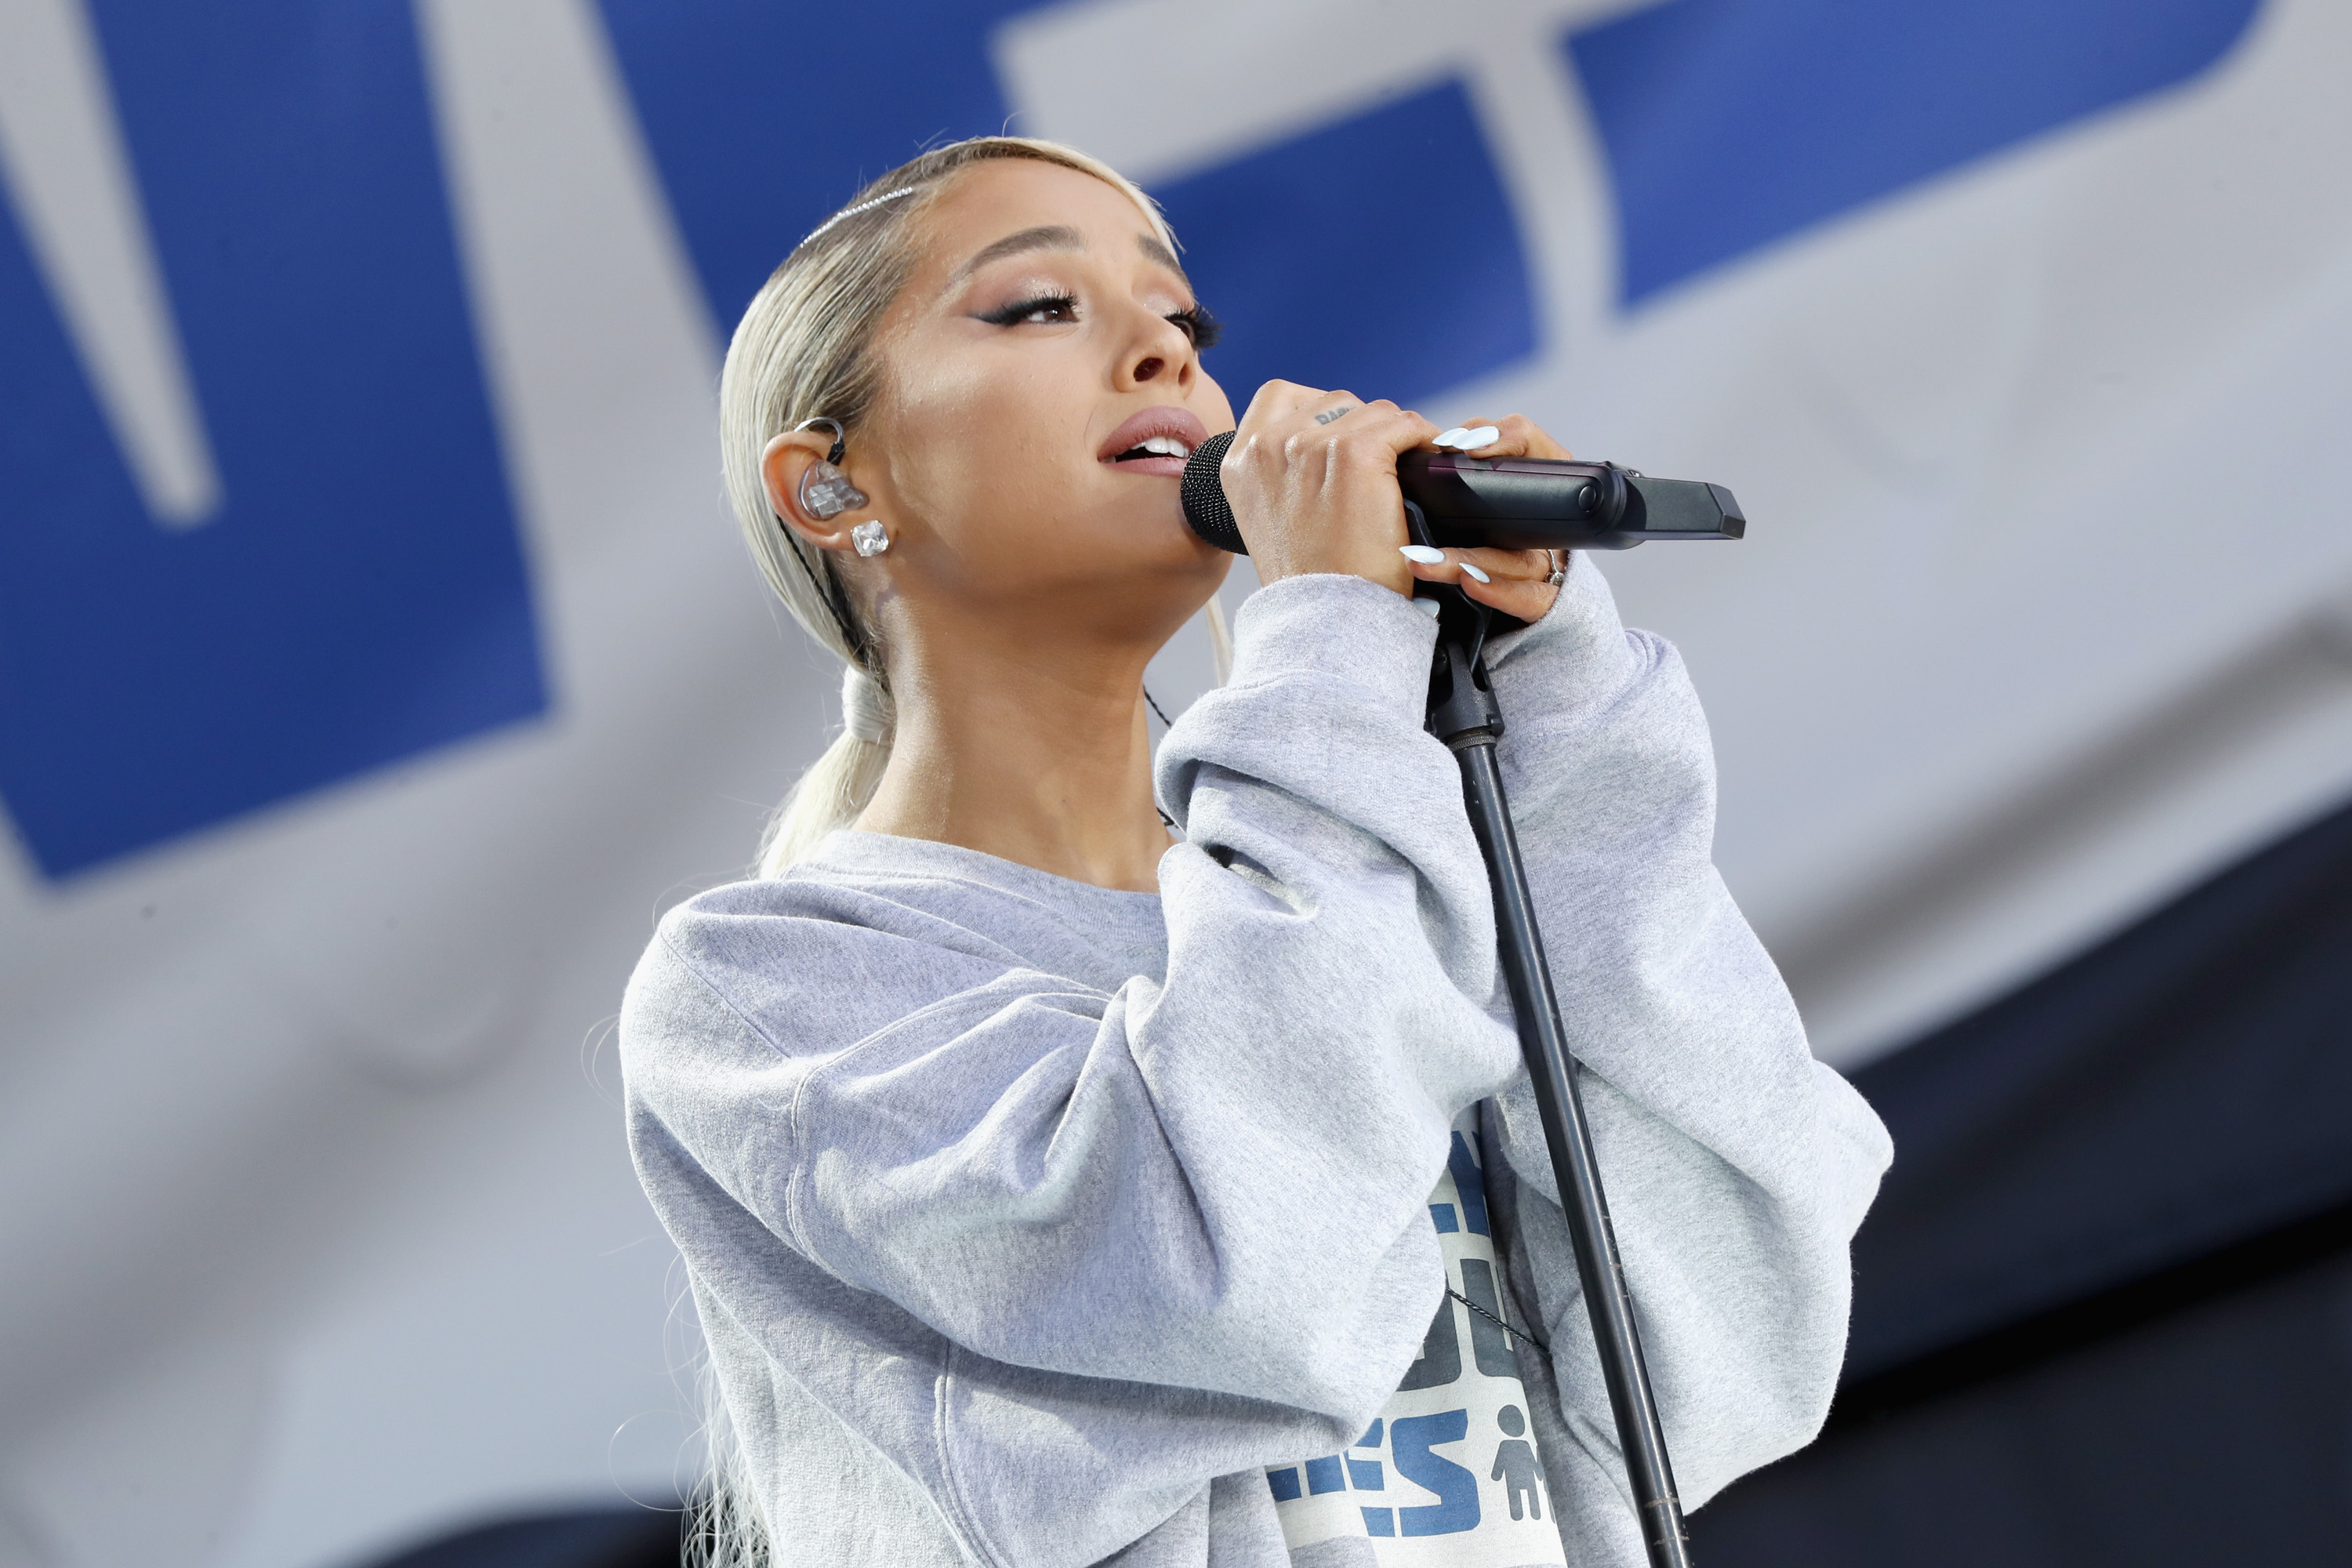 Ariana Grande attends March For Our Lives on March 24, 2018 in Washington, DC. (Paul Morigi—Getty Images for March For Our Lives)